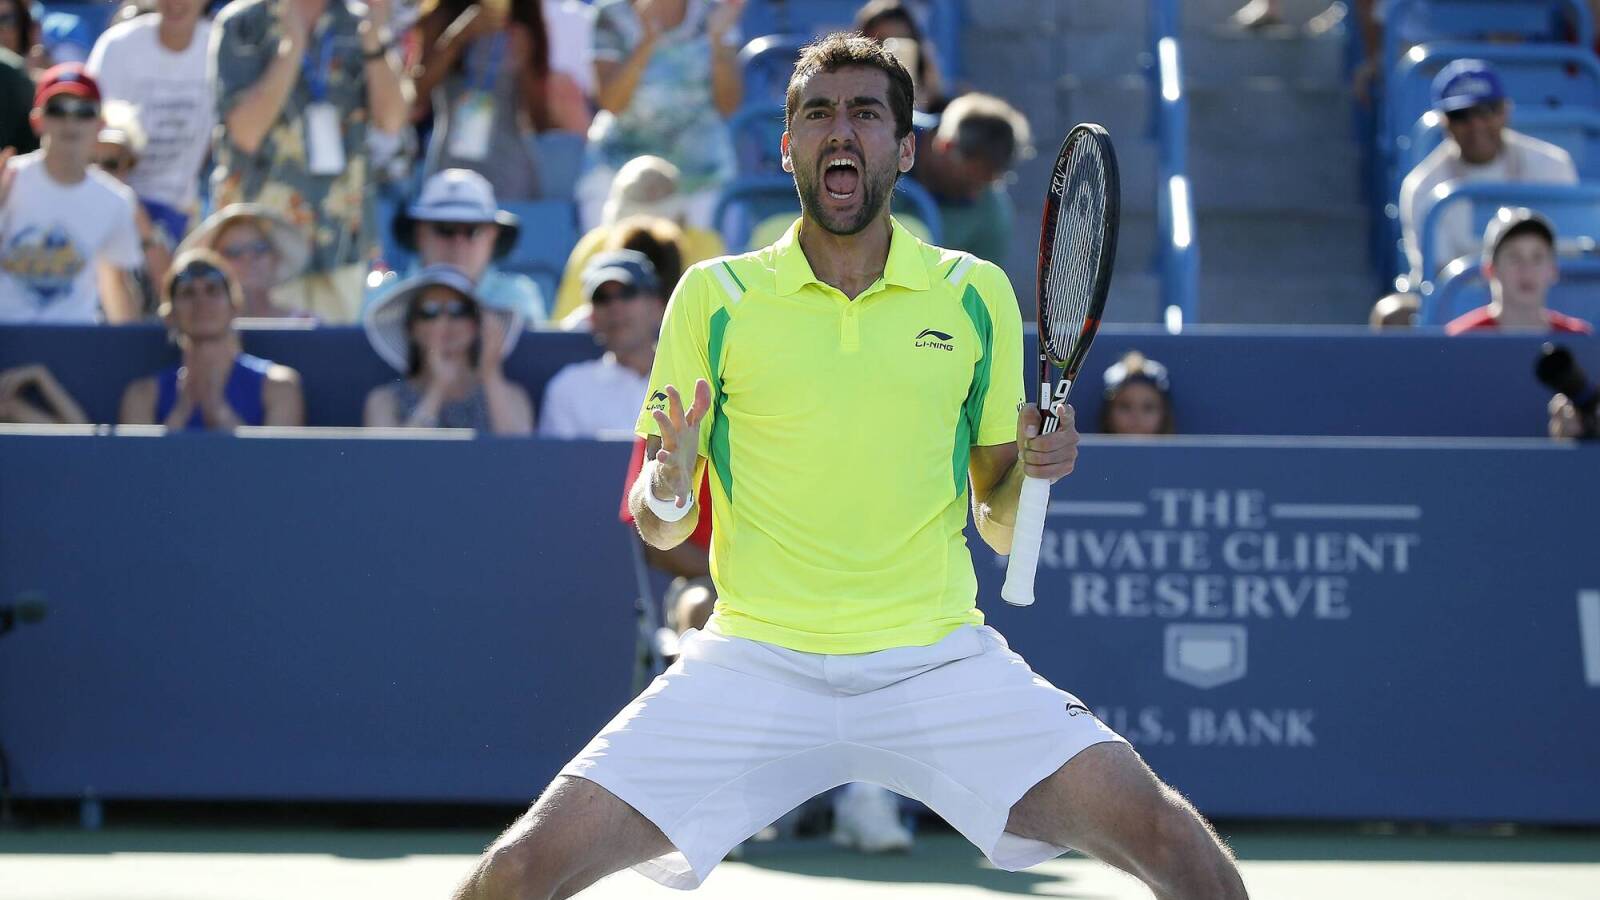 Former Wimbledon Finalist Cilic Withdraws From 2023 Championships